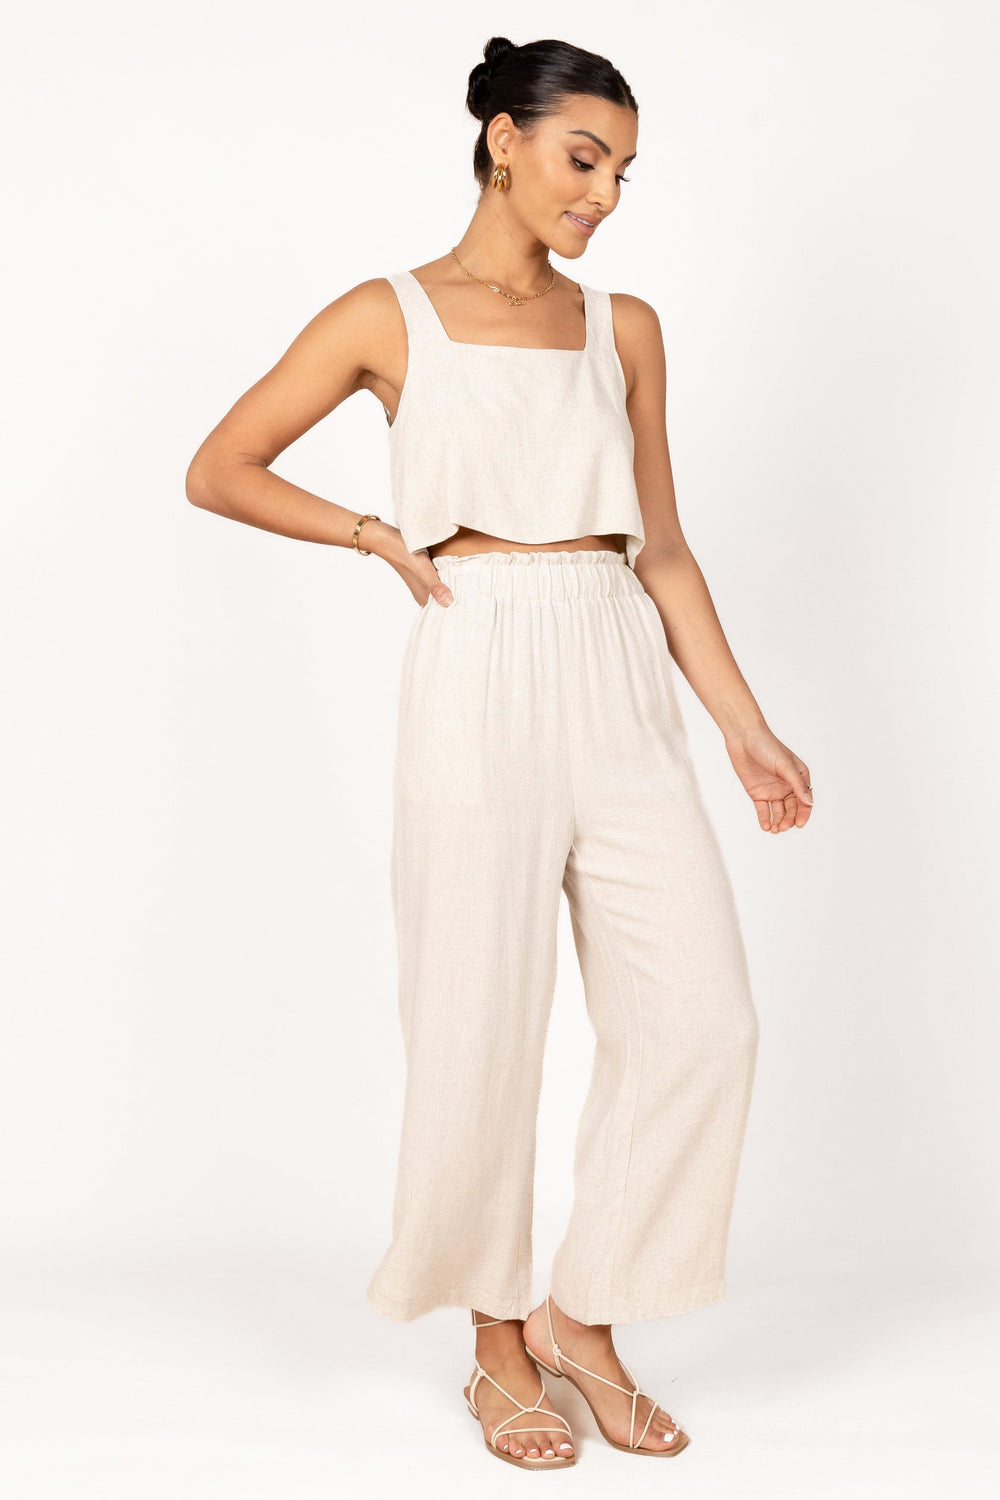 a tan crop top, tan wideleg pants, an oversized white shirt, creamy sandals  and statement earrings for co…